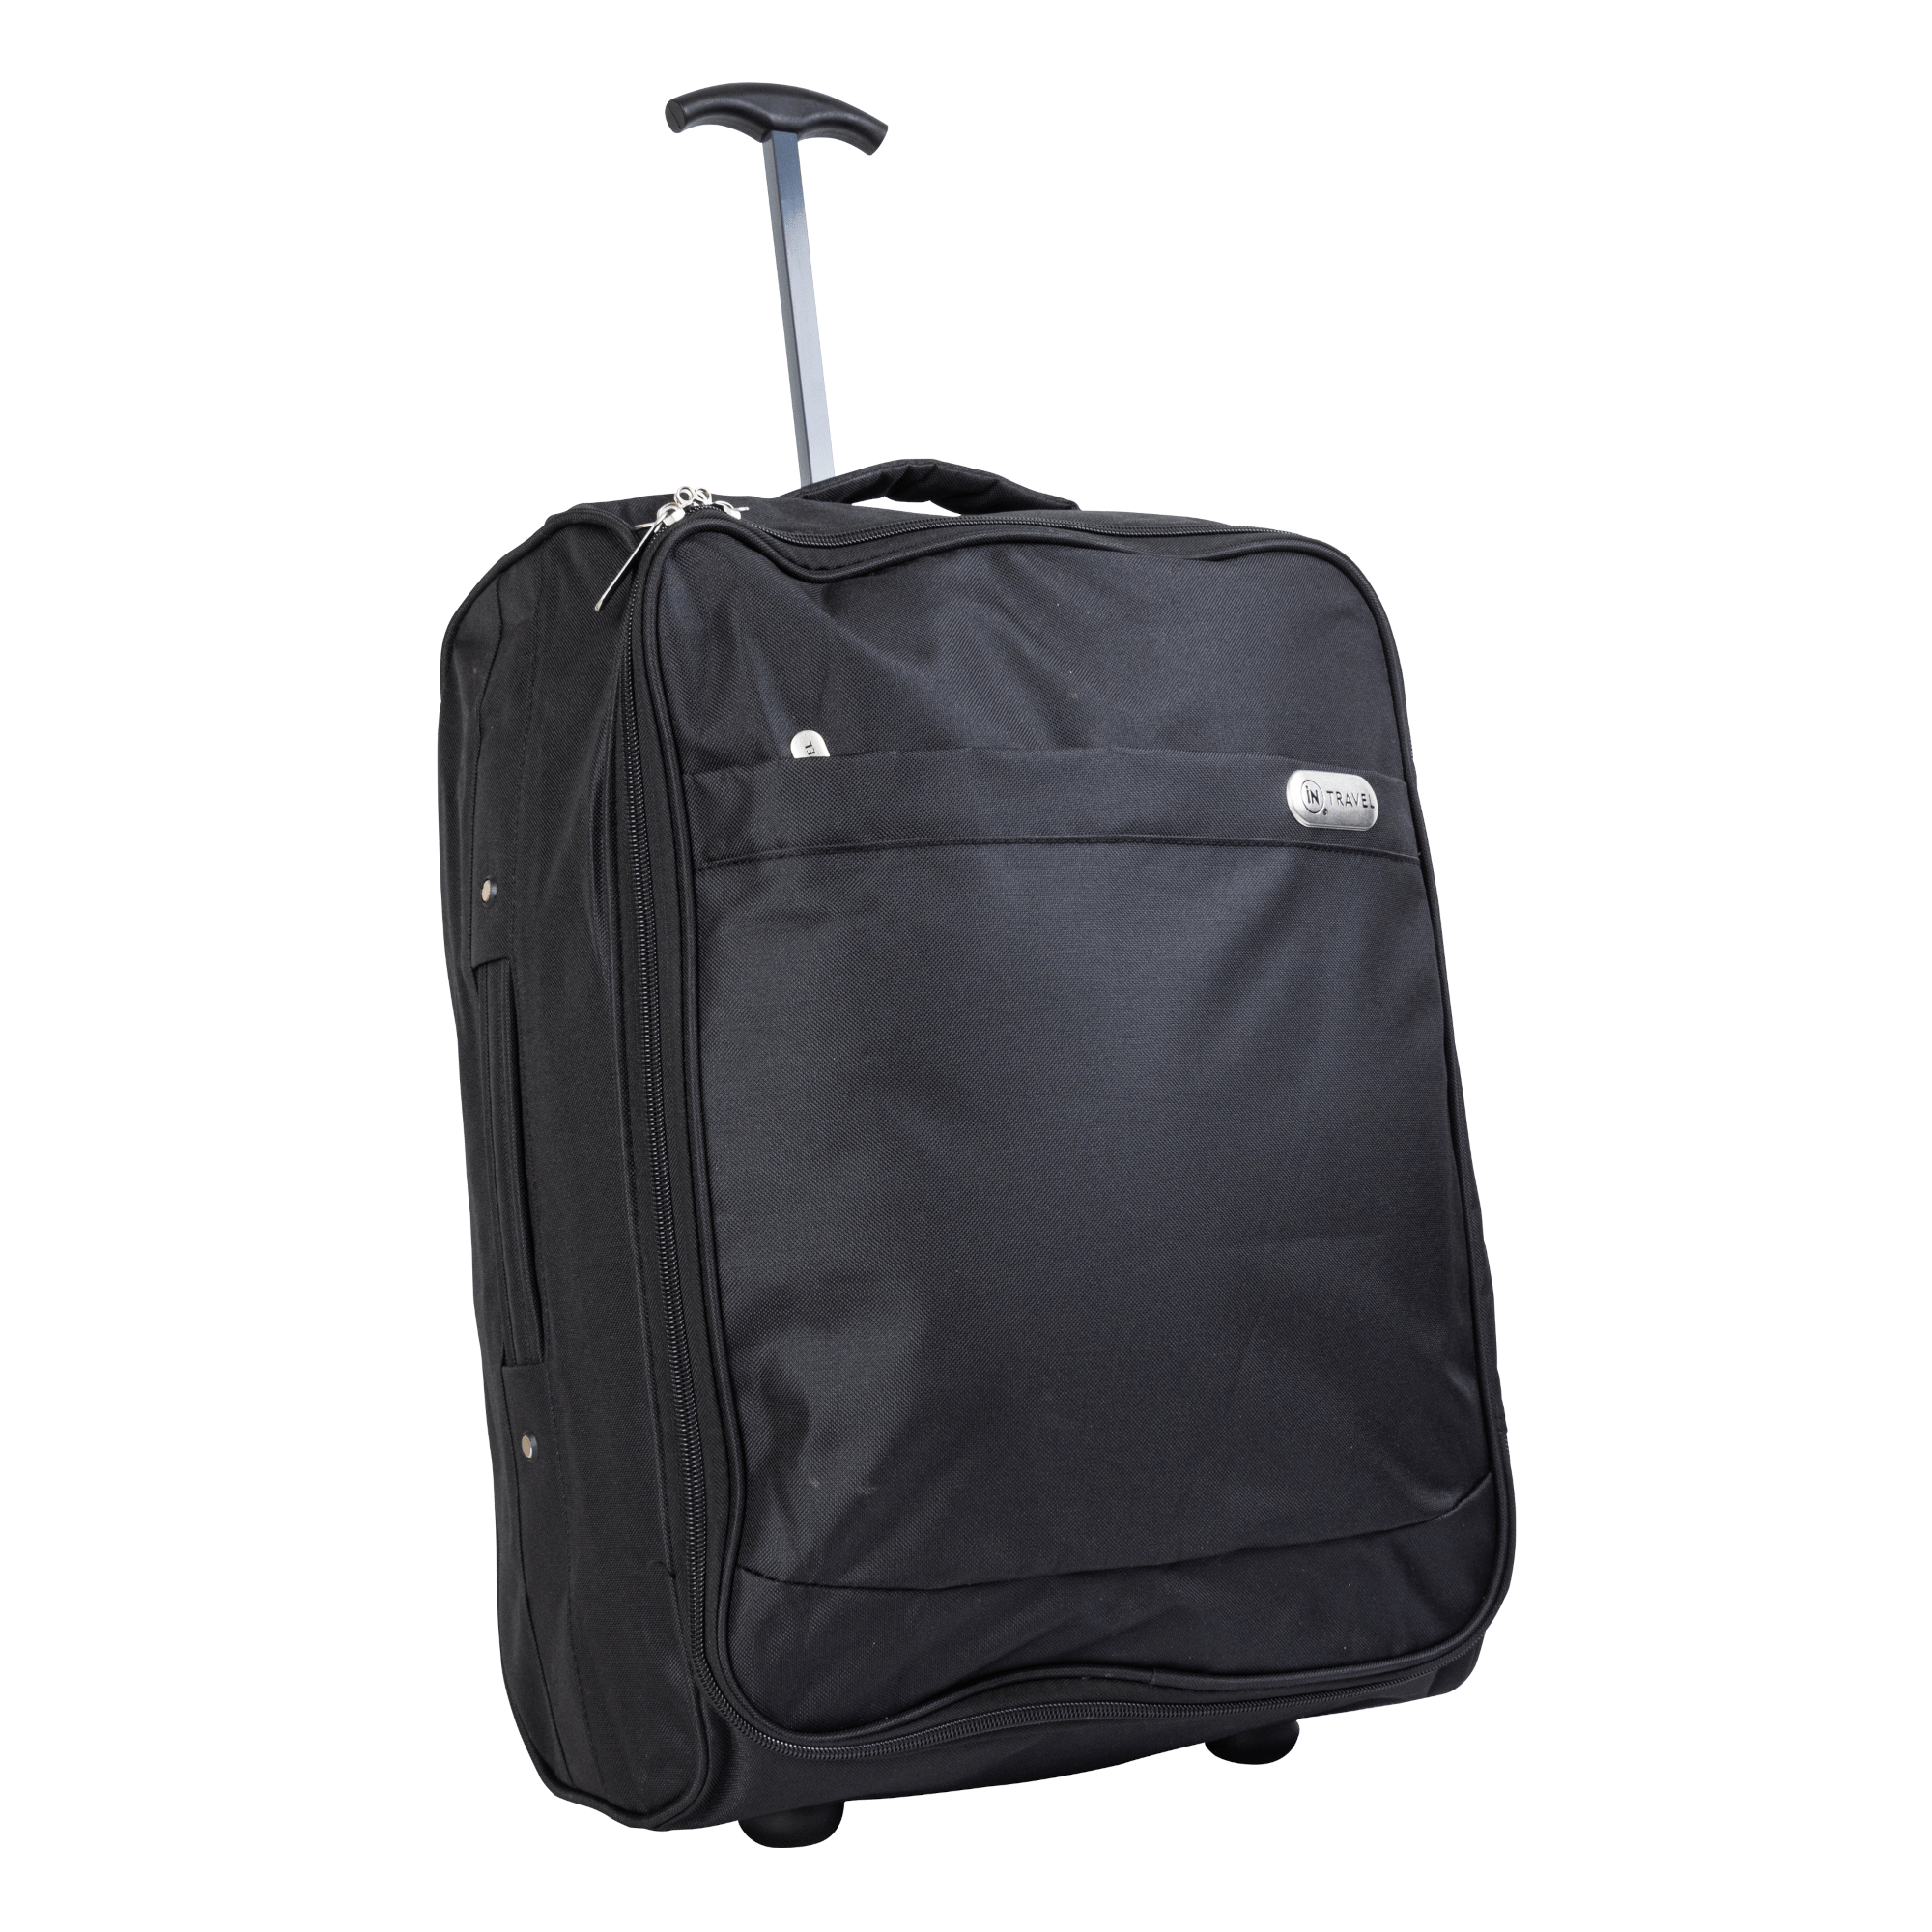 iN Travel, Large Duffle Bags, Luggage Bags, Travel Bags